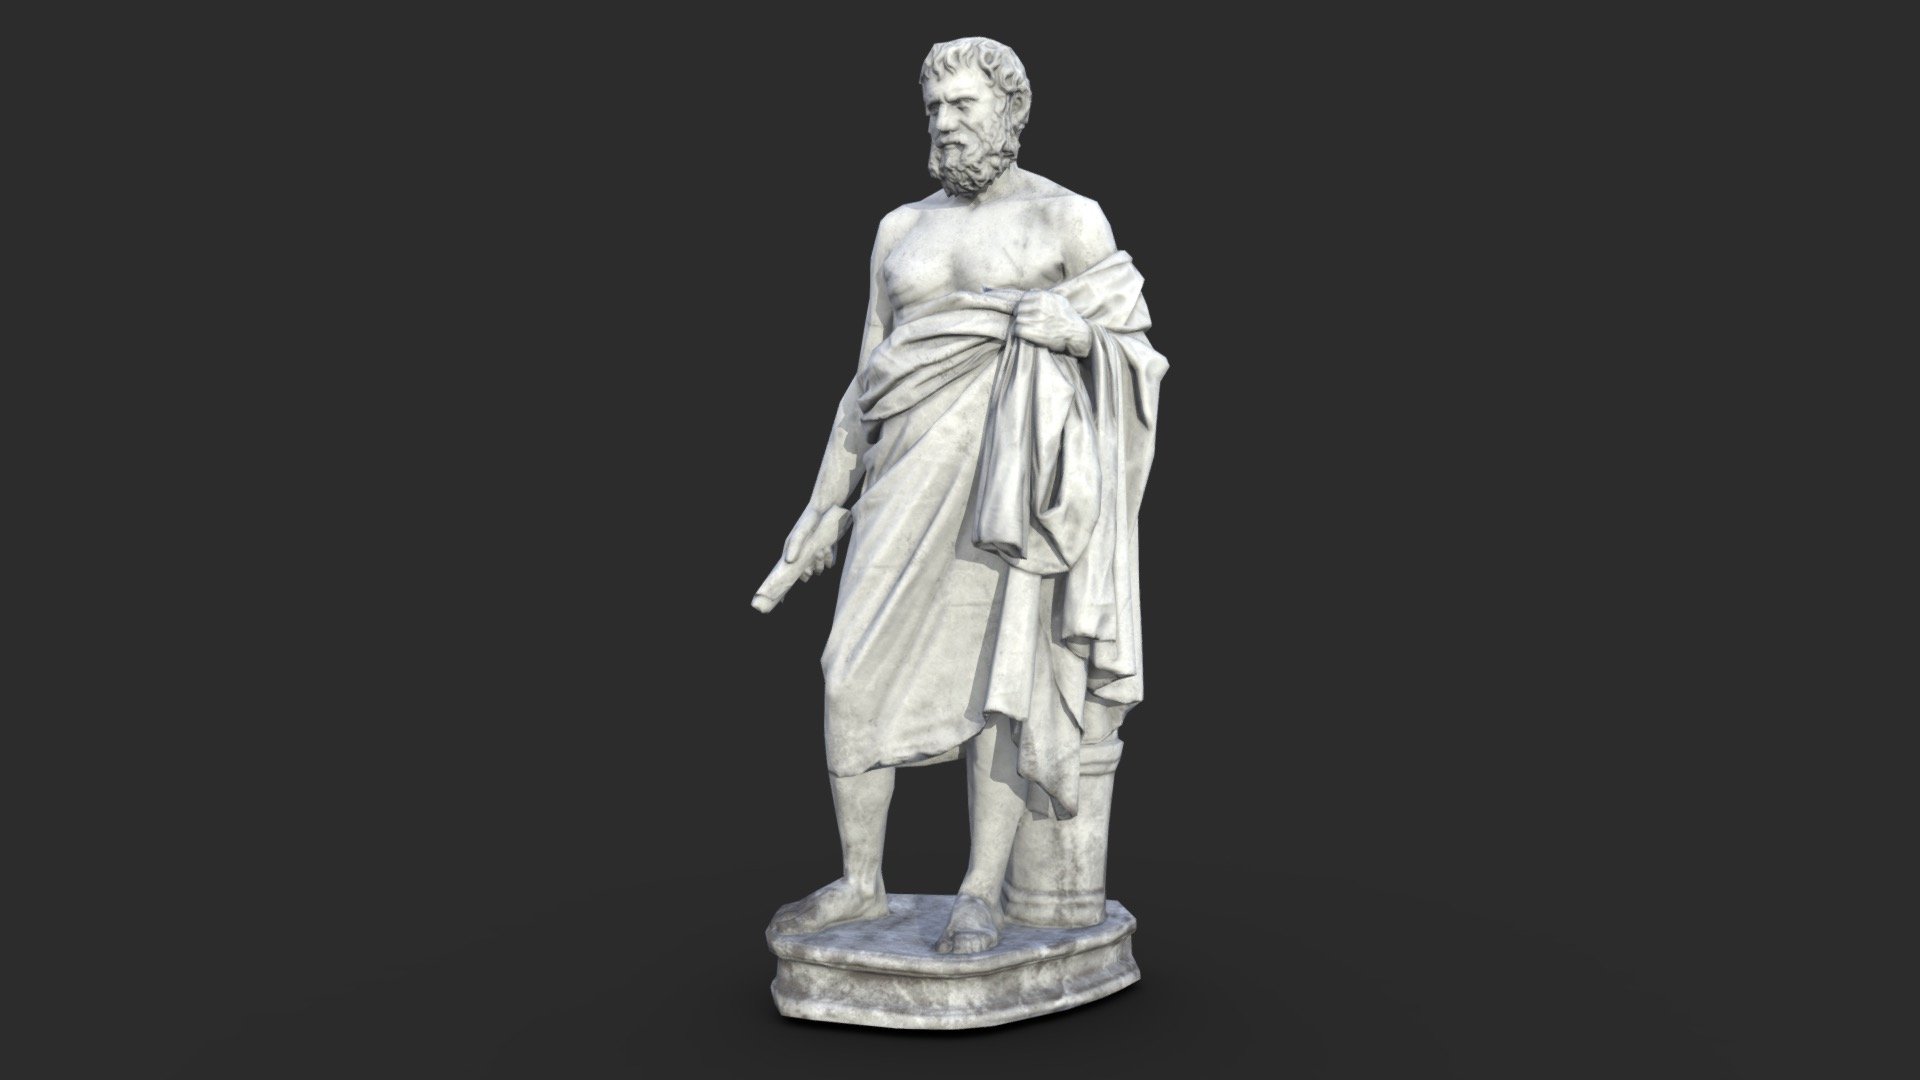 This Philosophe Antique Statue in granite material includes 6 LODs and a collider set. 

The asset is available in realistic style and can be used in any game (post-apo, first person shooter, GTA like, historical… ). All objects share a unique material for the best optimization for games.

This AAA game asset of an antique sculpture will embellish you scene and add more details which can help the gameplay and the game-design or level-design.

All textures are PBR ready and available in 4K.

Low-poly model &amp; Blender native 3.3

SPECIFICATIONS


Objects : 1
Polygons : 3965
Render engine : Eevee (Cycles ready)

GAME SPECS


LODs : Yes (inside FBX for Unity &amp; Unreal)
Numbers of LODs : 6
Collider : Yes

EXPORTED FORMATS


FBX
Collada
OBJ

TEXTURES


Materials in scene : 1
Textures sizes : 4K
Textures types : Base Color, Metallic, Roughness, Normal (DirectX &amp; OpenGL), Heigh, AO (also Unity &amp; Unreal ARM workflow maps)
Textures format : PNG
 - Greek Man Statue - Granite - Buy Royalty Free 3D model by KangaroOz 3D (@KangaroOz-3D) 3d model